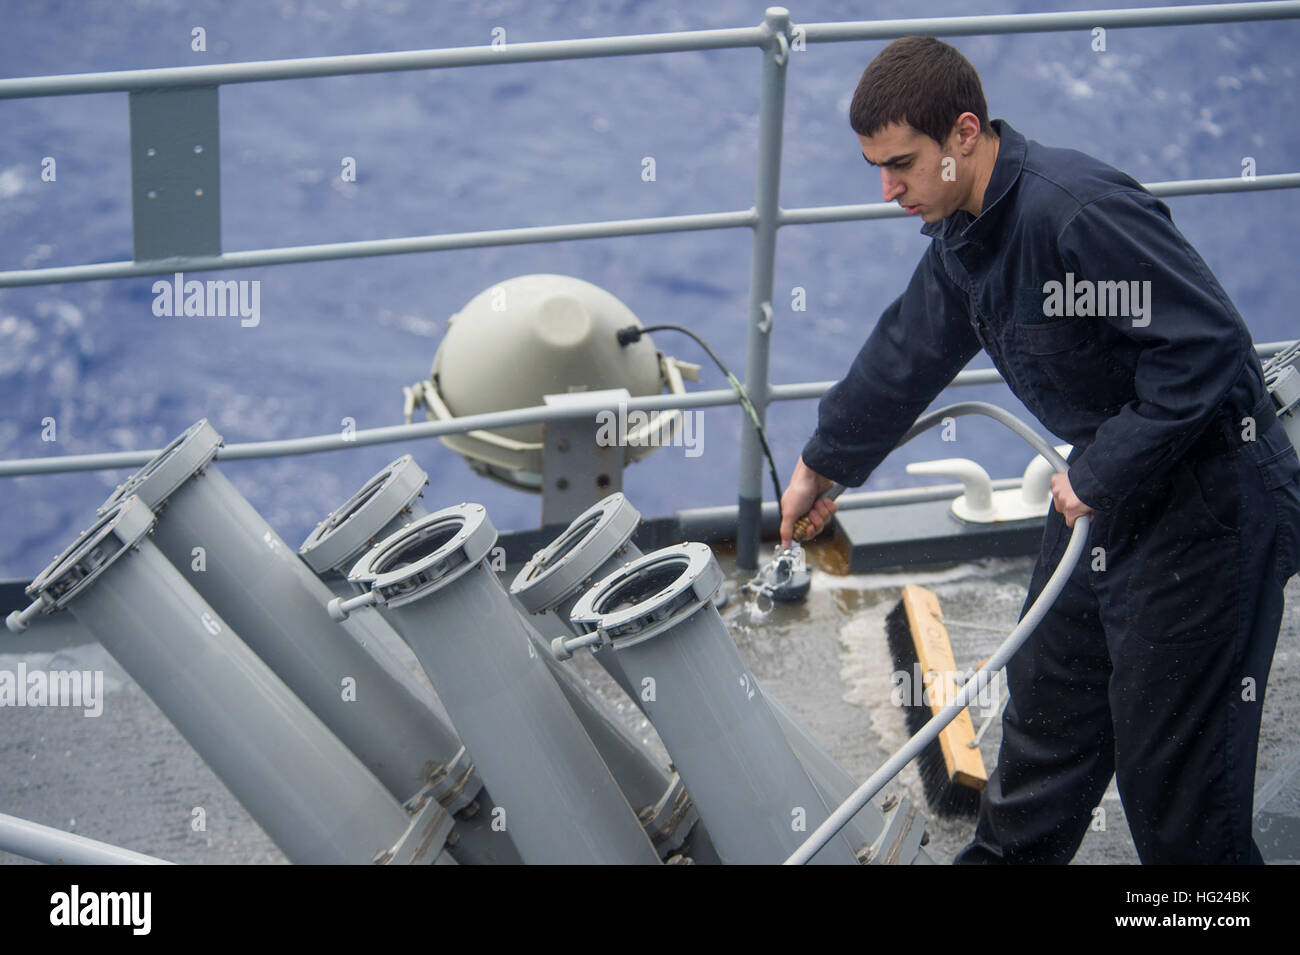 150210-N-CU914-068   PACIFIC OCEAN (Feb. 10, 2015) – Cryptological Technician (Technical) Seaman Apprentice Scott J. Ferer, from Buffalo, N.Y., hoses down a chaff launcher aboard the dock landing ship USS Comstock (LSD 45) during a fresh-water wash-down. Comstock, part of the Makin Island Amphibious Ready Group, and the embarked 11th Marine Expeditionary Unit are returning to homeport San Diego following a seven-month deployment to the Western Pacific and the U.S. Central Command areas of operation. (U.S. Navy photo by Mass Communication Specialist 3rd Class Lenny LaCrosse/Released) USS Comsto Stock Photo